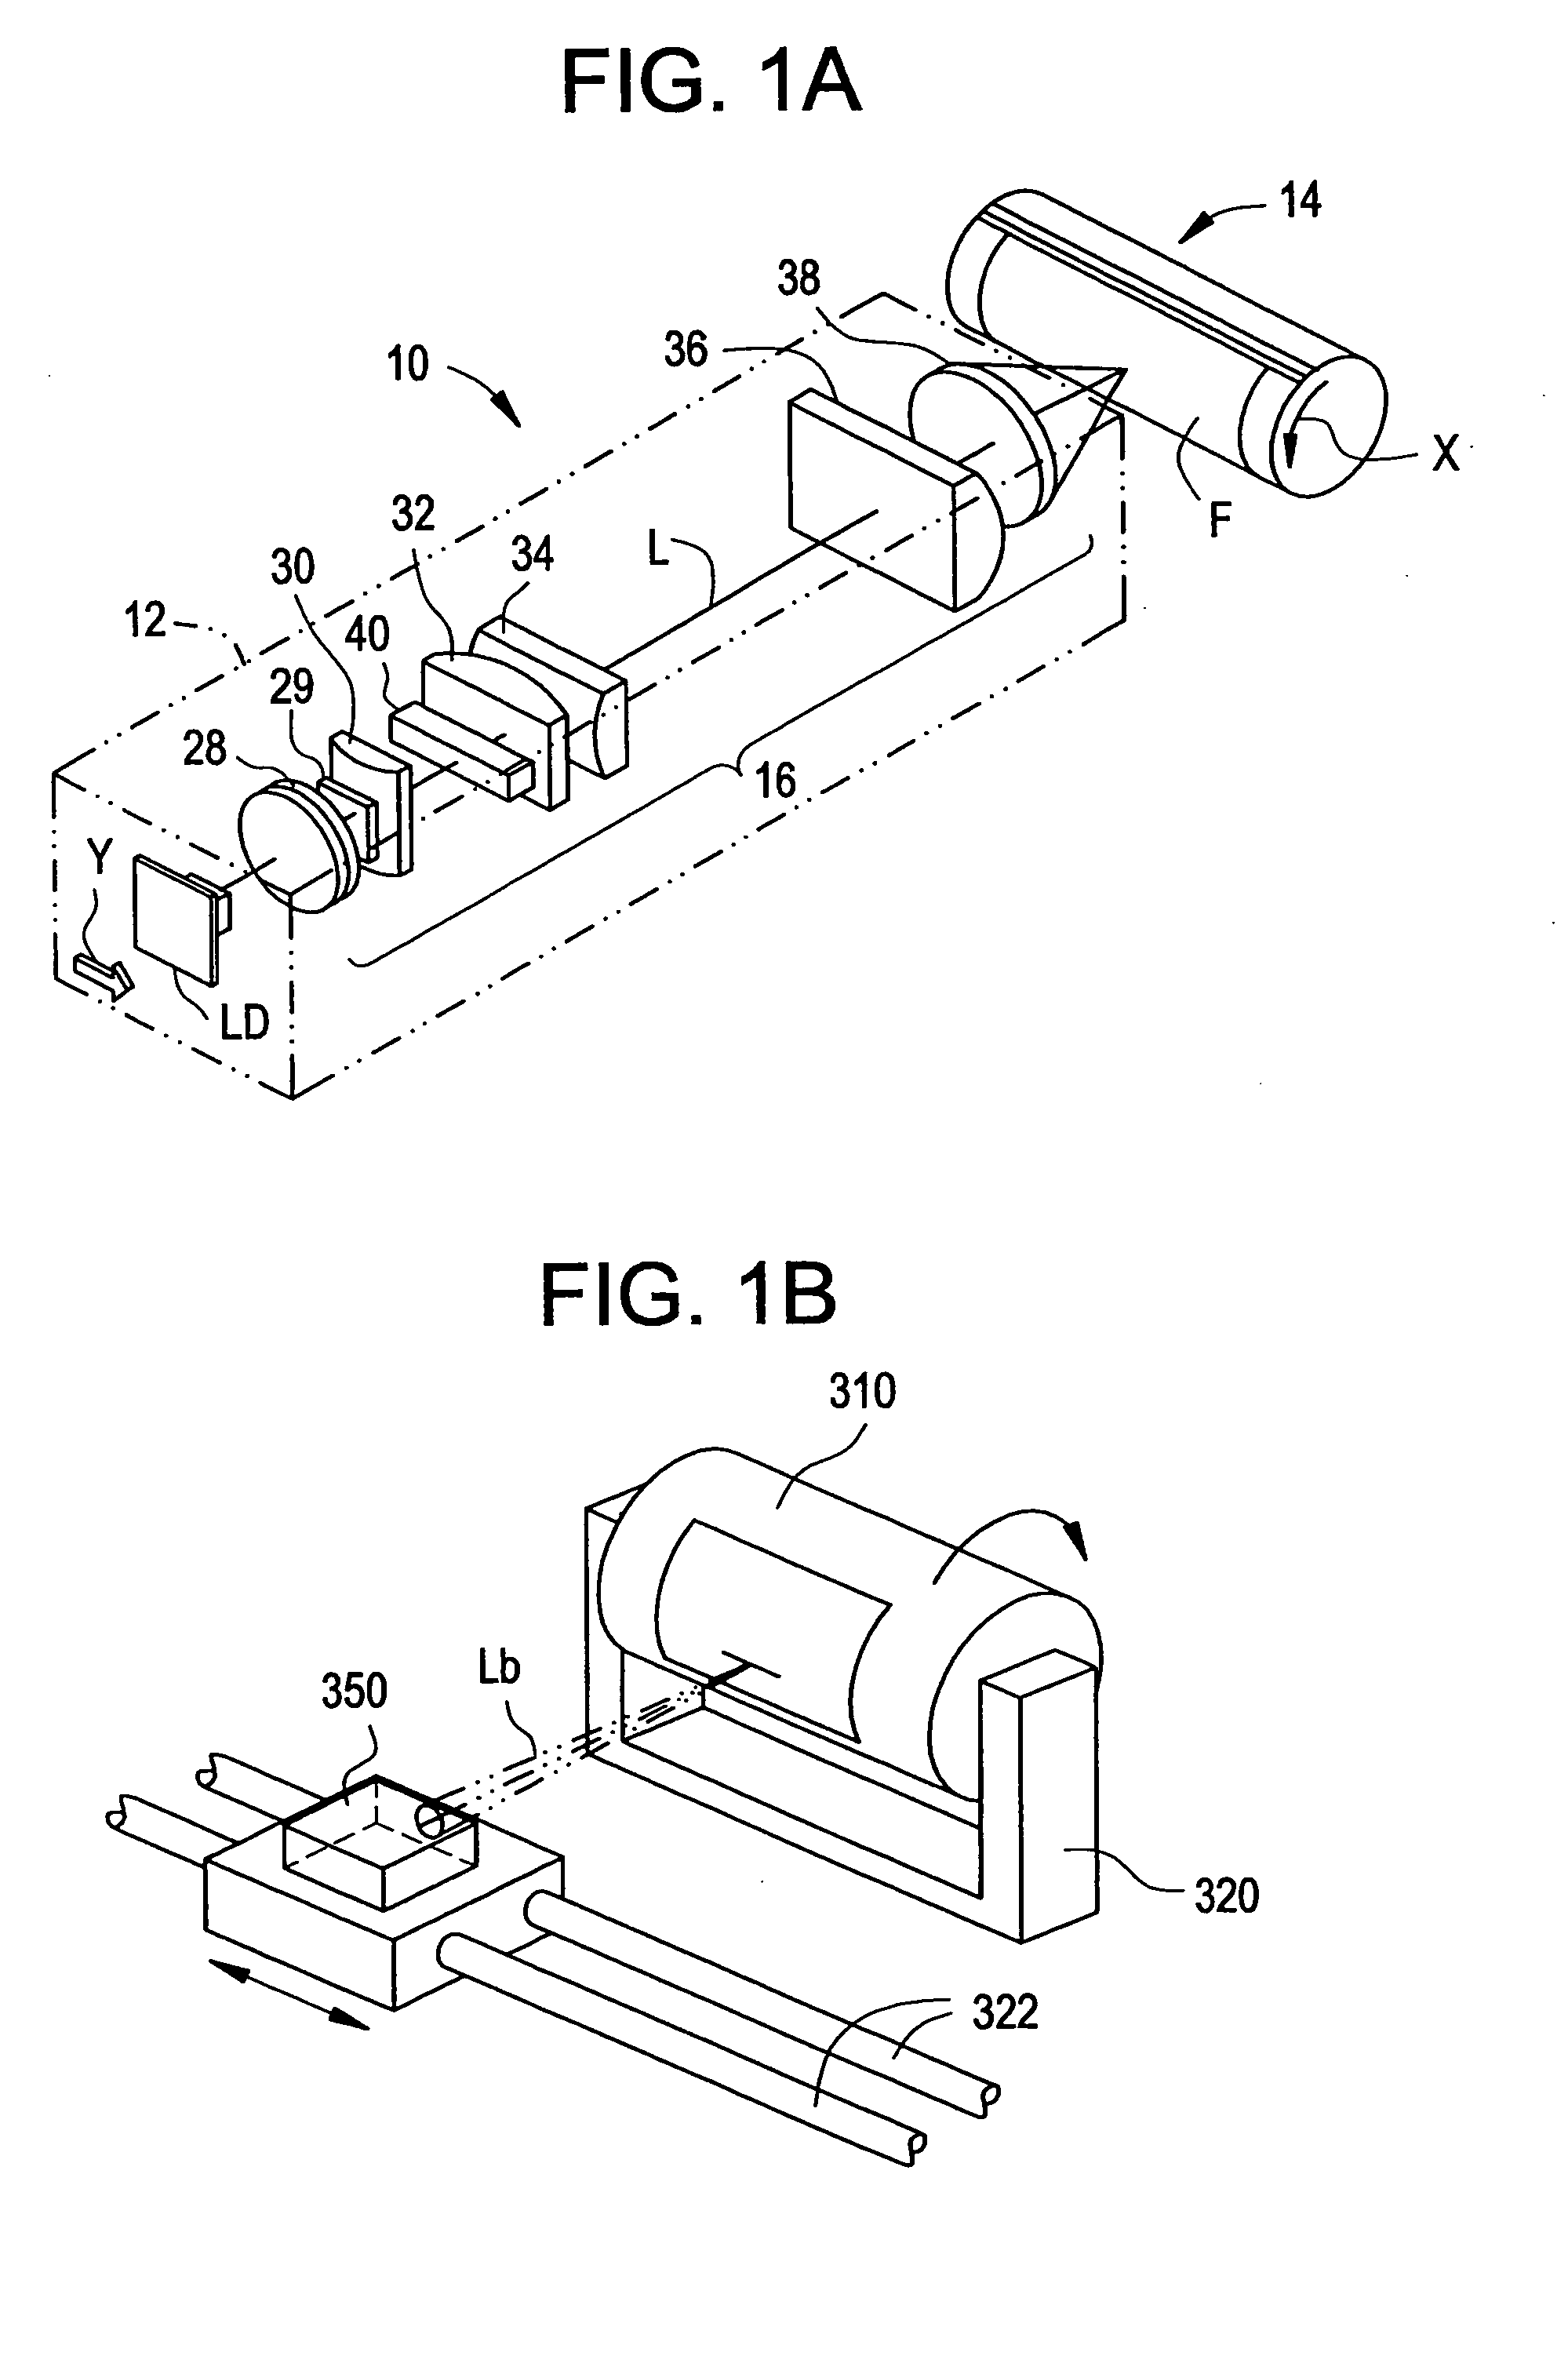 Platforms, apparatuses, systems and methods for processing and analyzing substrates